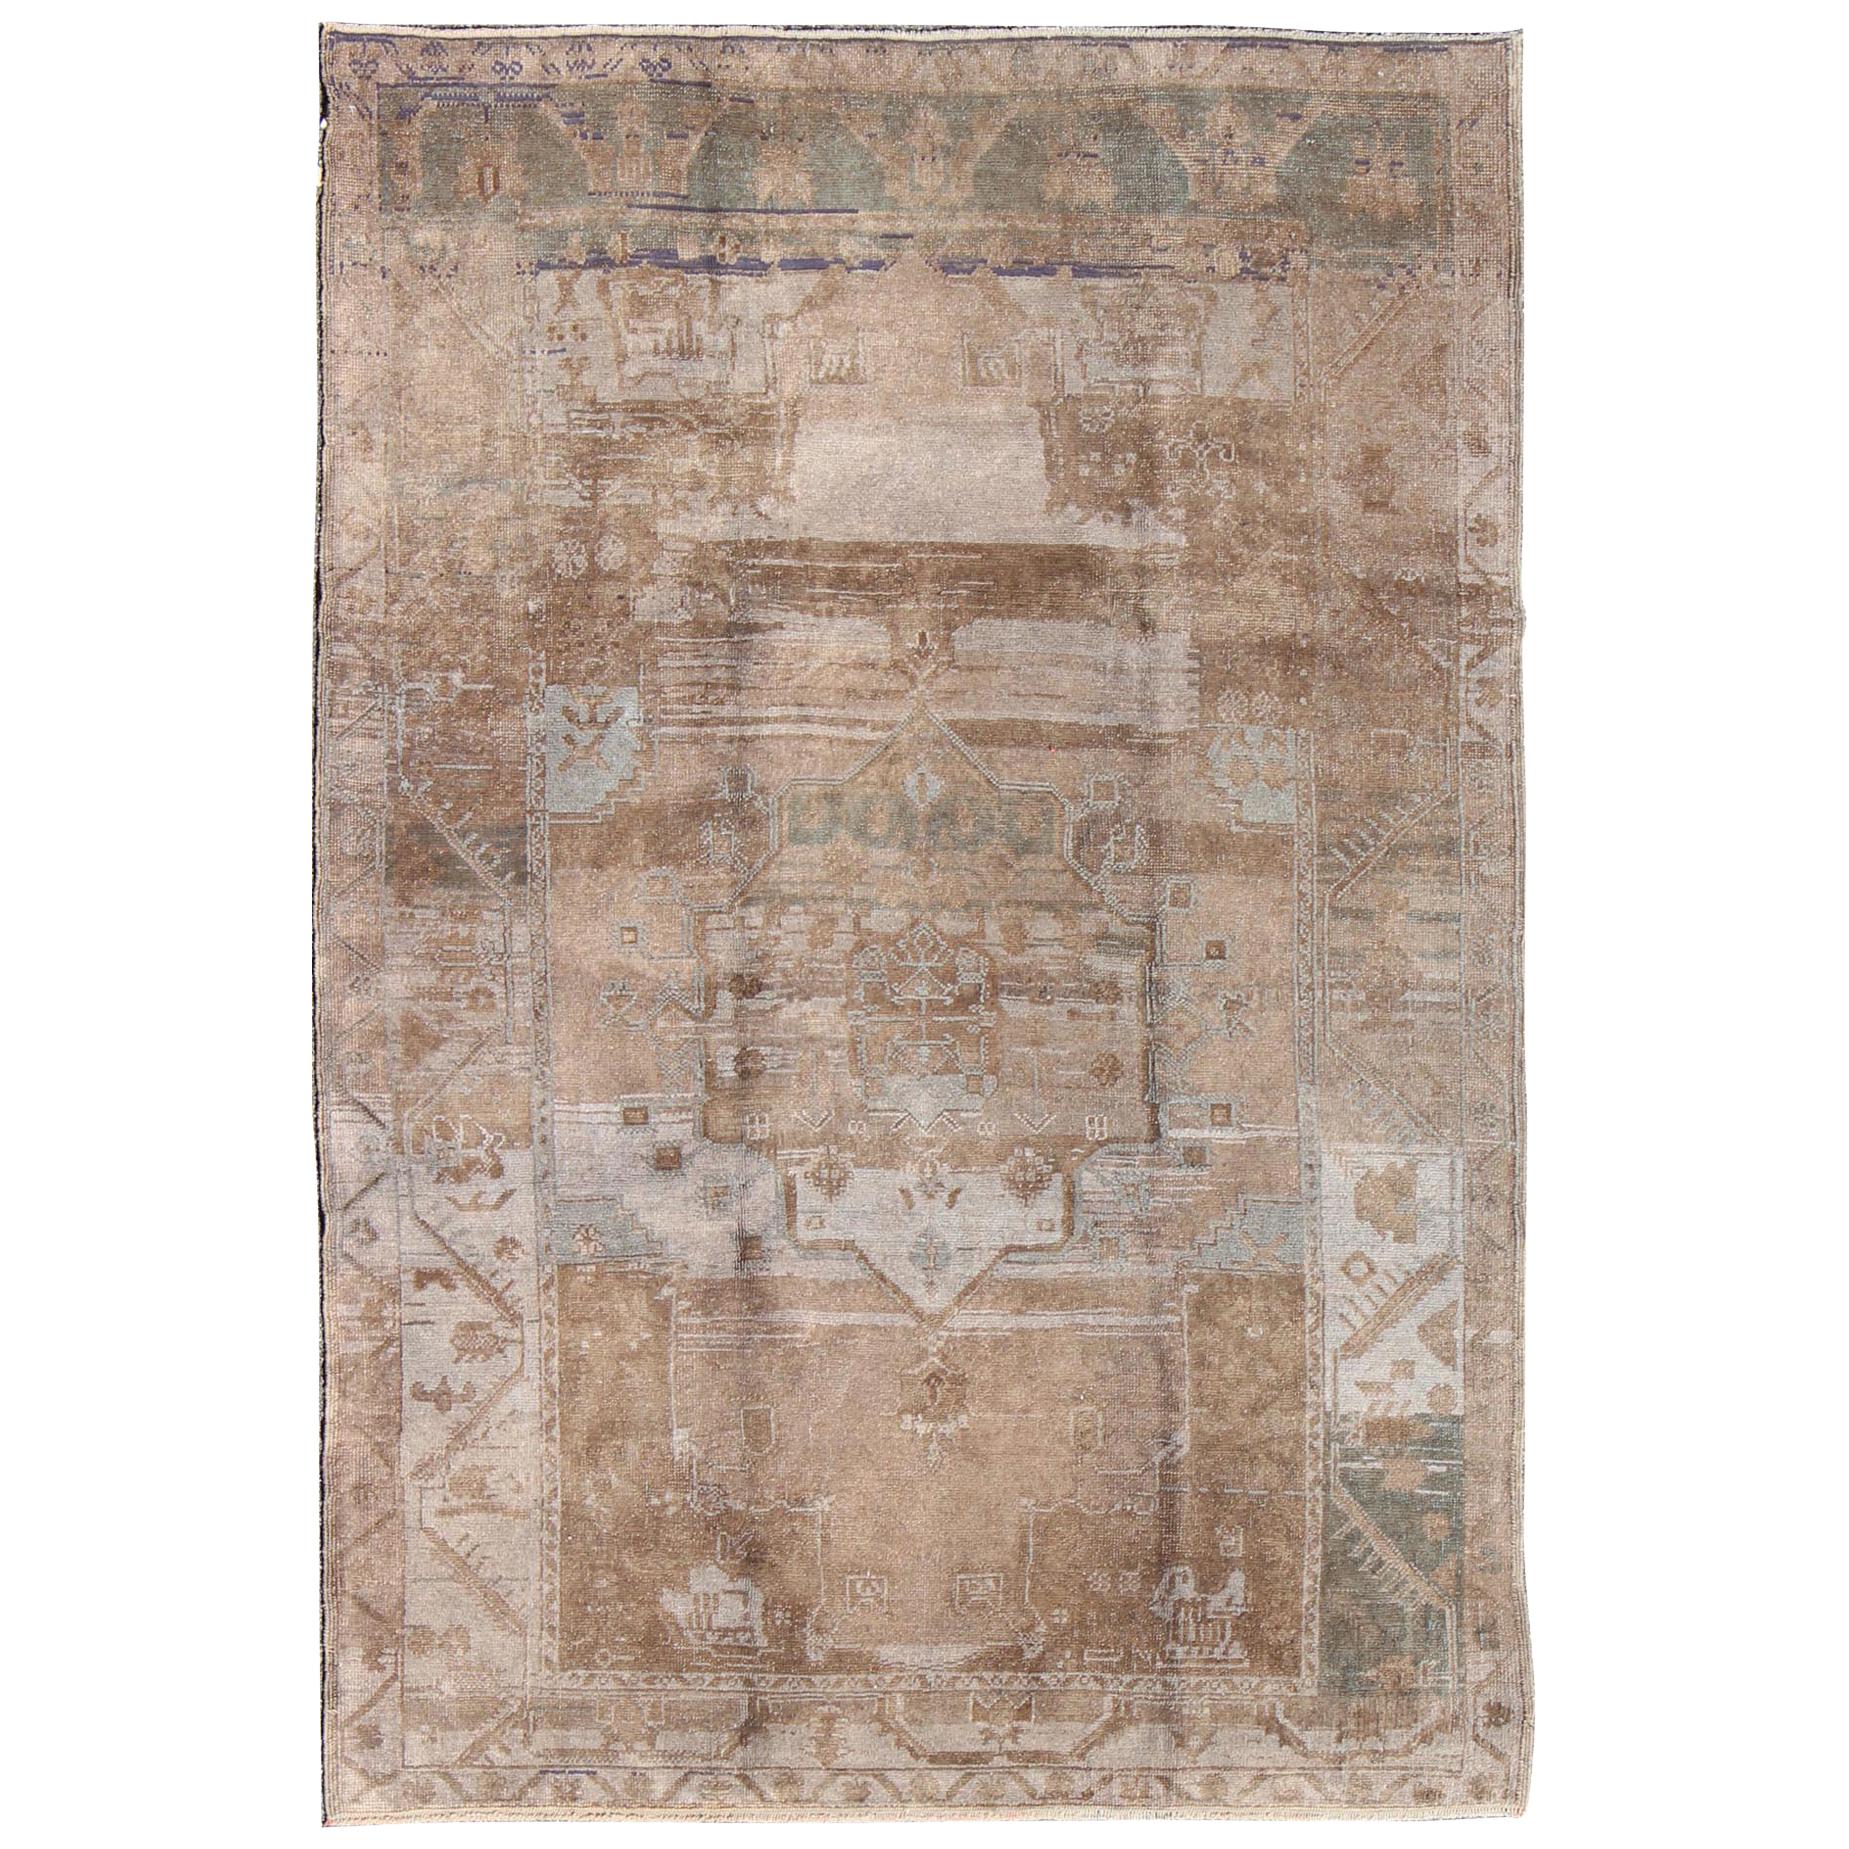 Faded Brown and Gray Vintage Oushak Rug from Turkey with Medallion Design